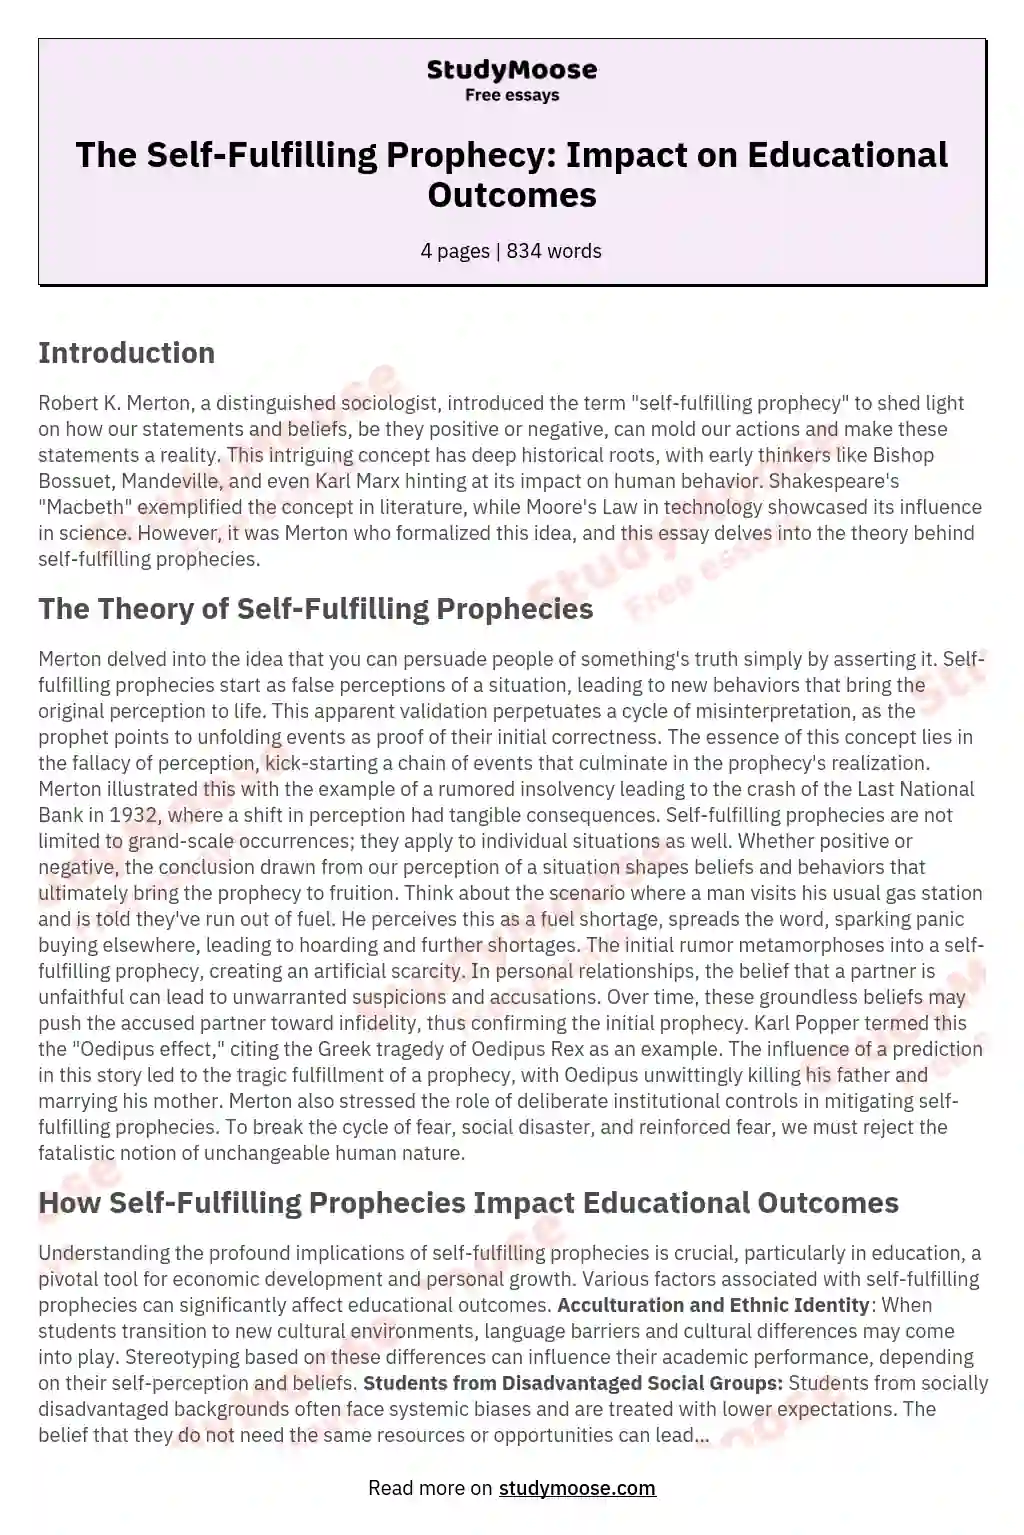 The Self-Fulfilling Prophecy: Impact on Educational Outcomes essay